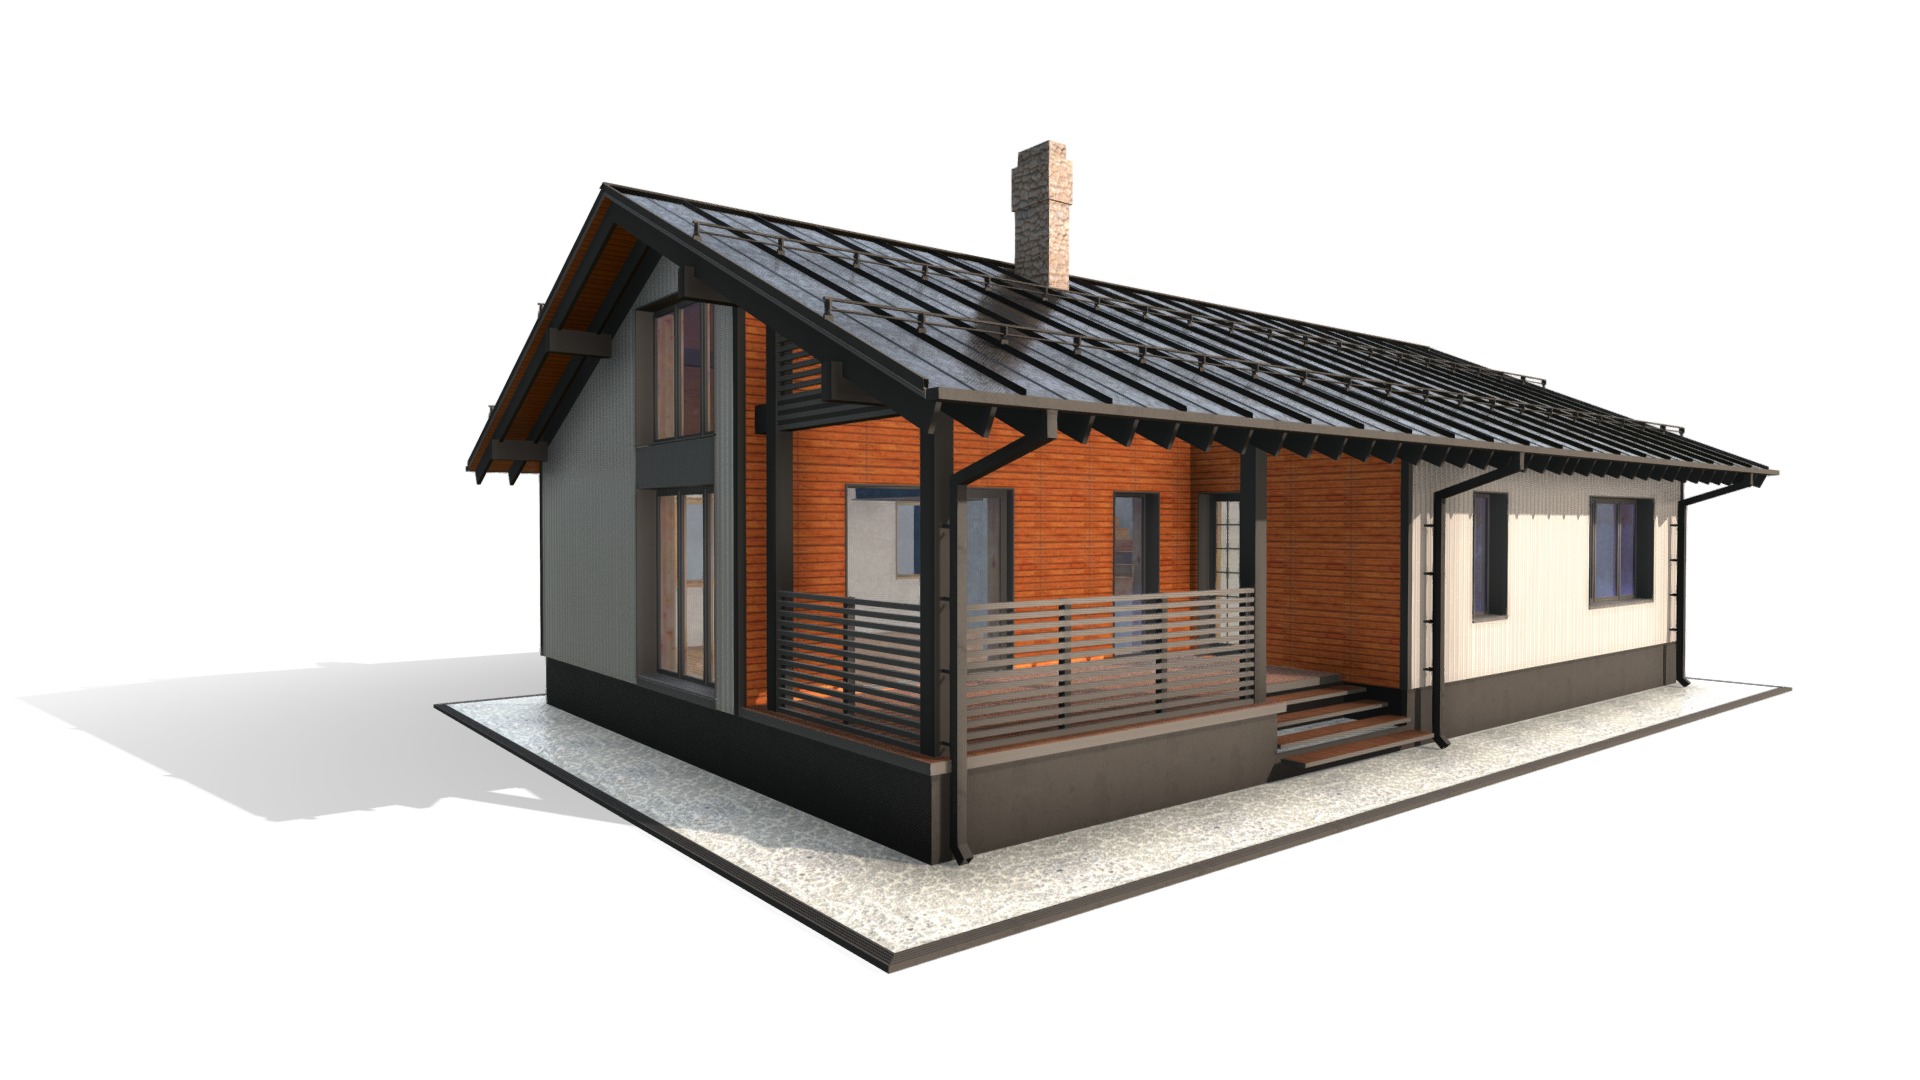 3D model 1 floor house – geometry optimized - This is a 3D model of the 1 floor house - geometry optimized. The 3D model is about a small wooden house.